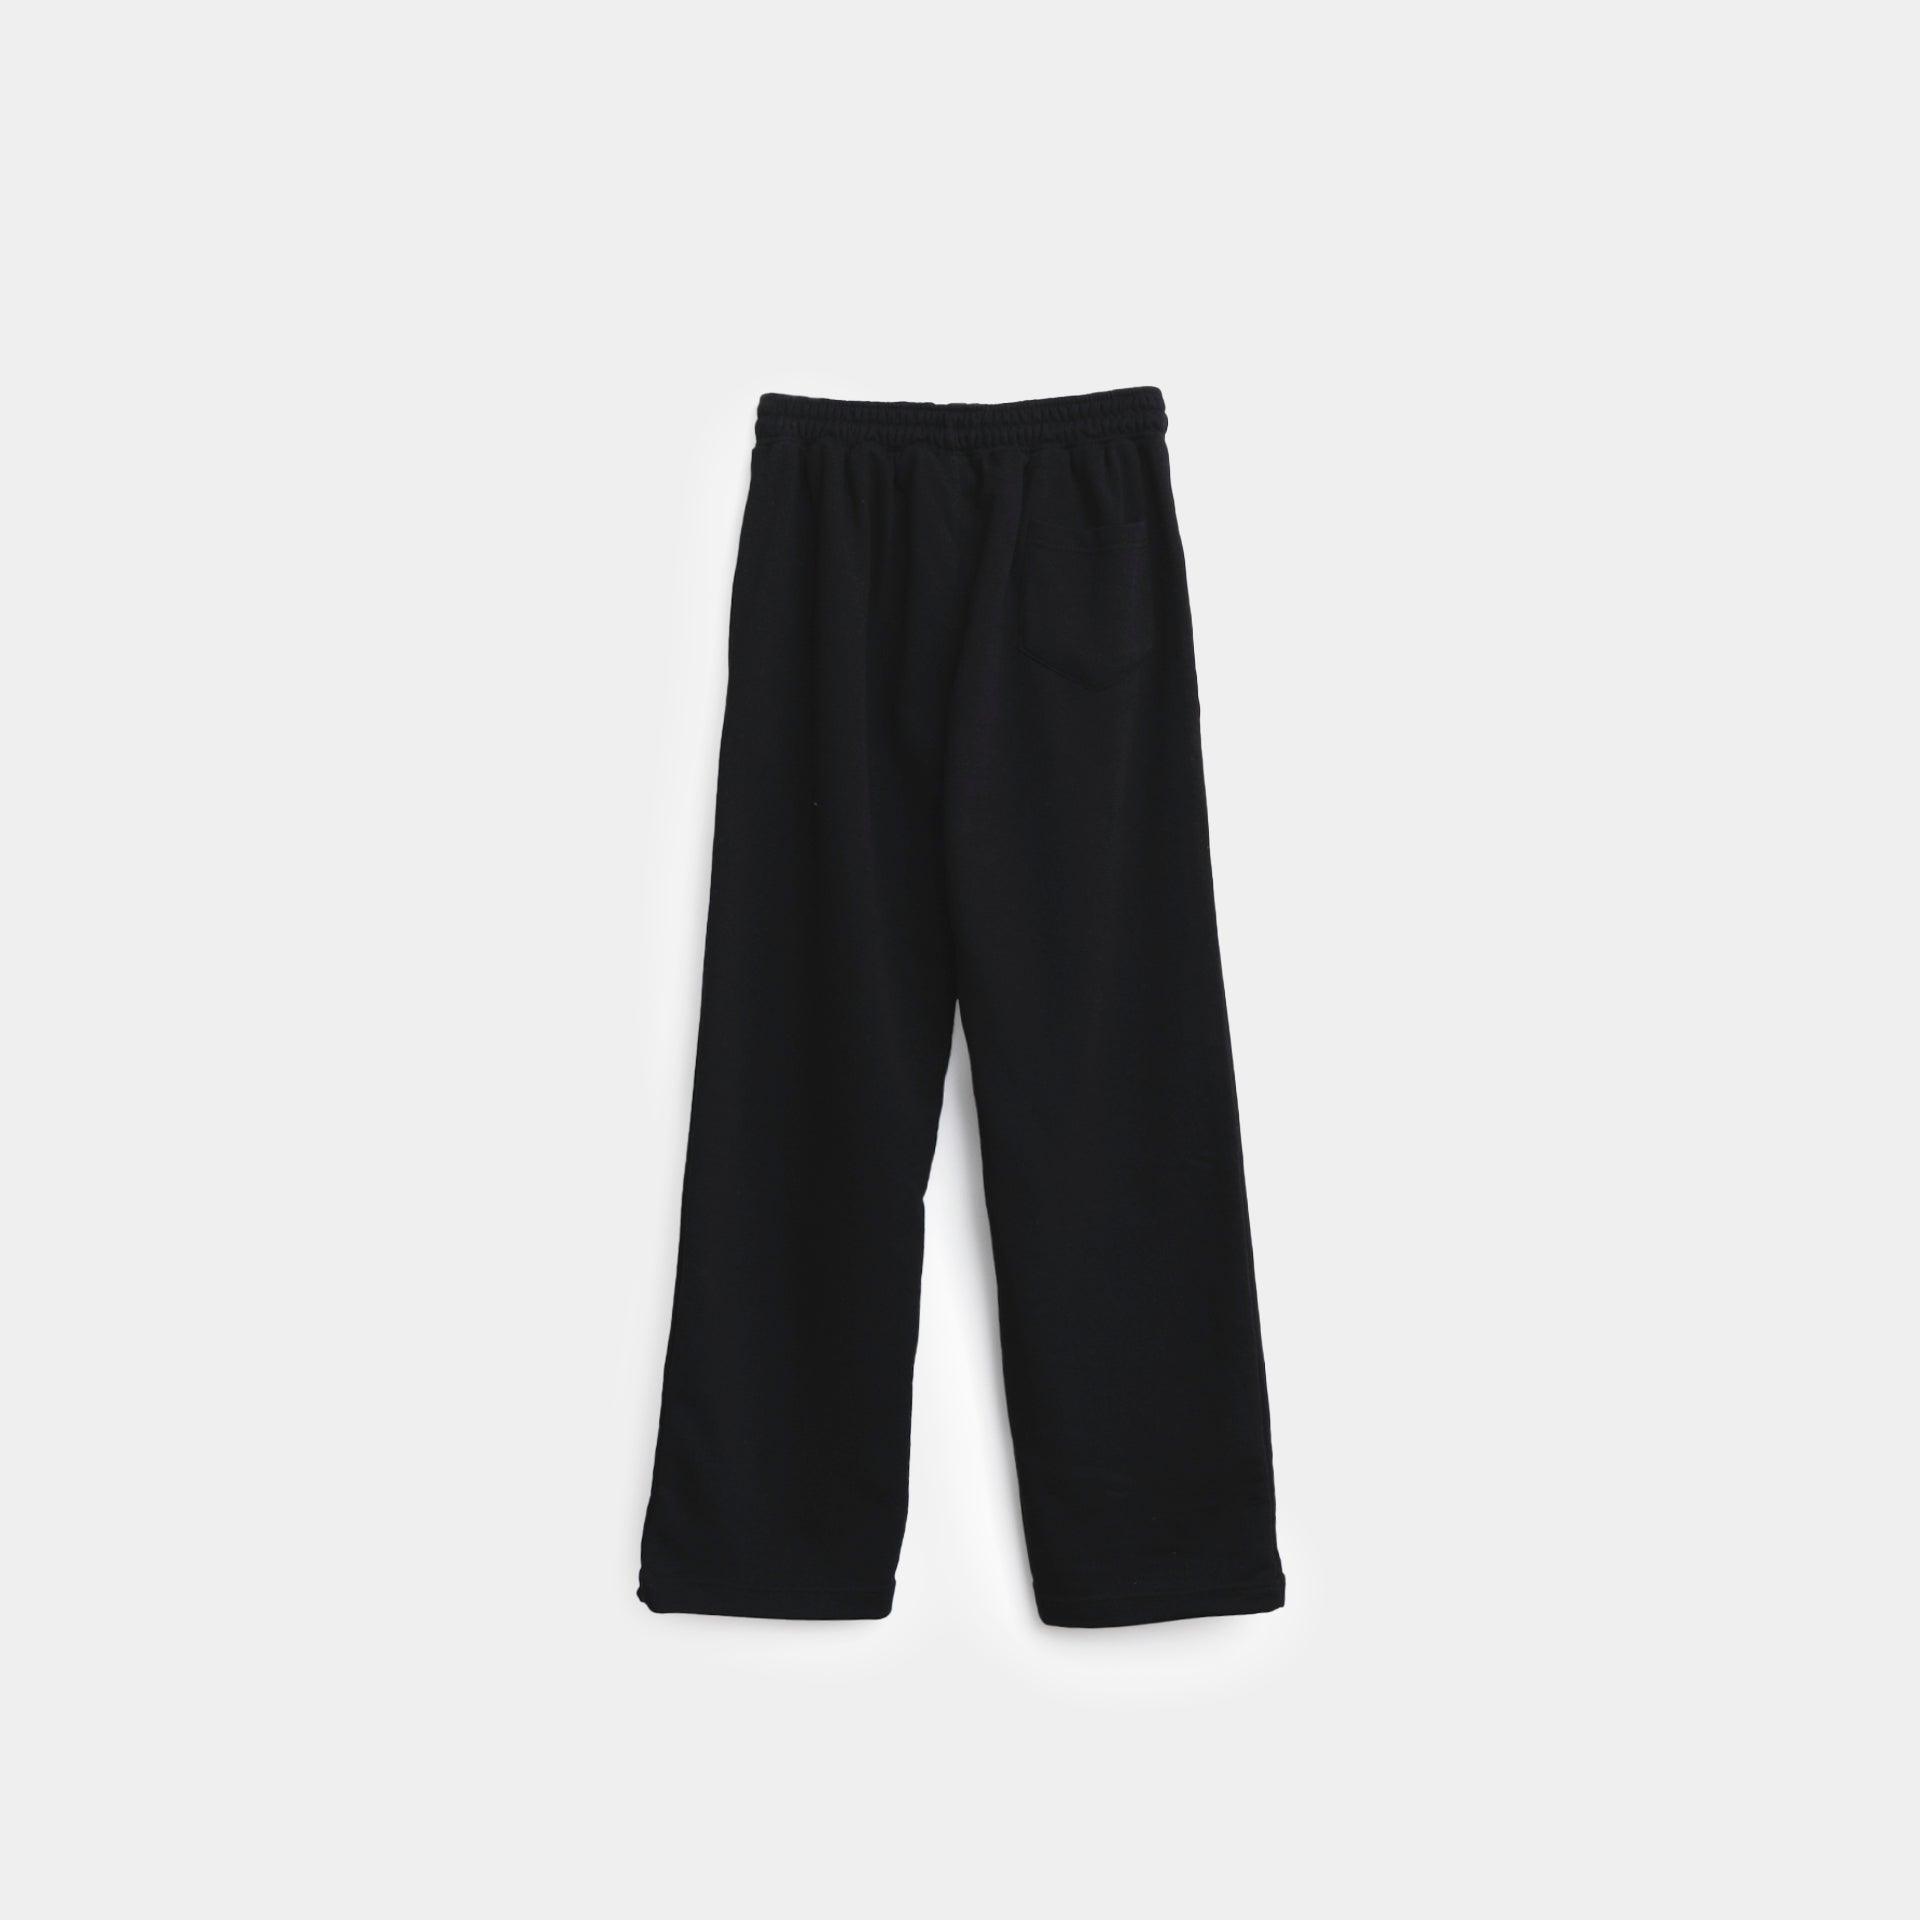 Black Classic Pants From Cono - WECRE8